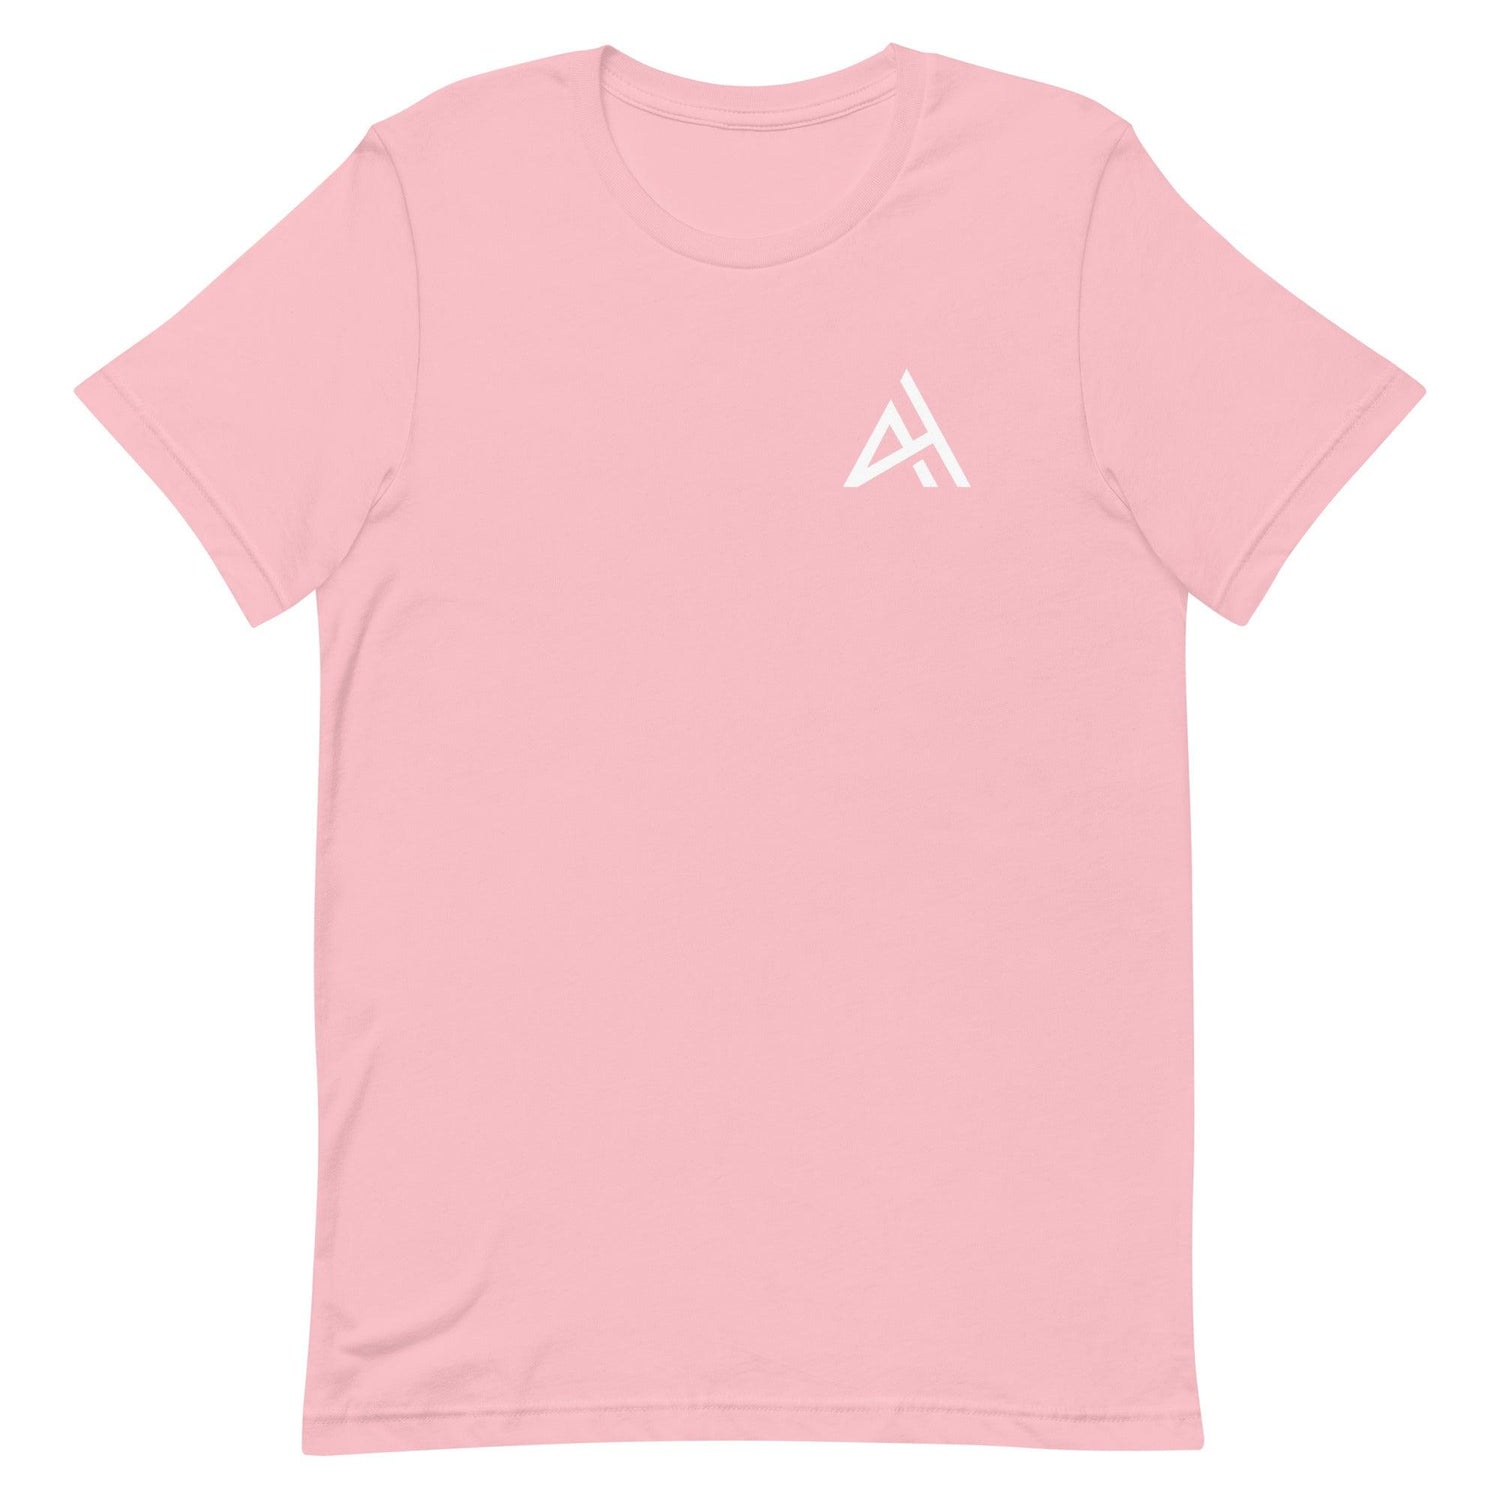 Aaron Hester "Essential" t-shirt - Fan Arch